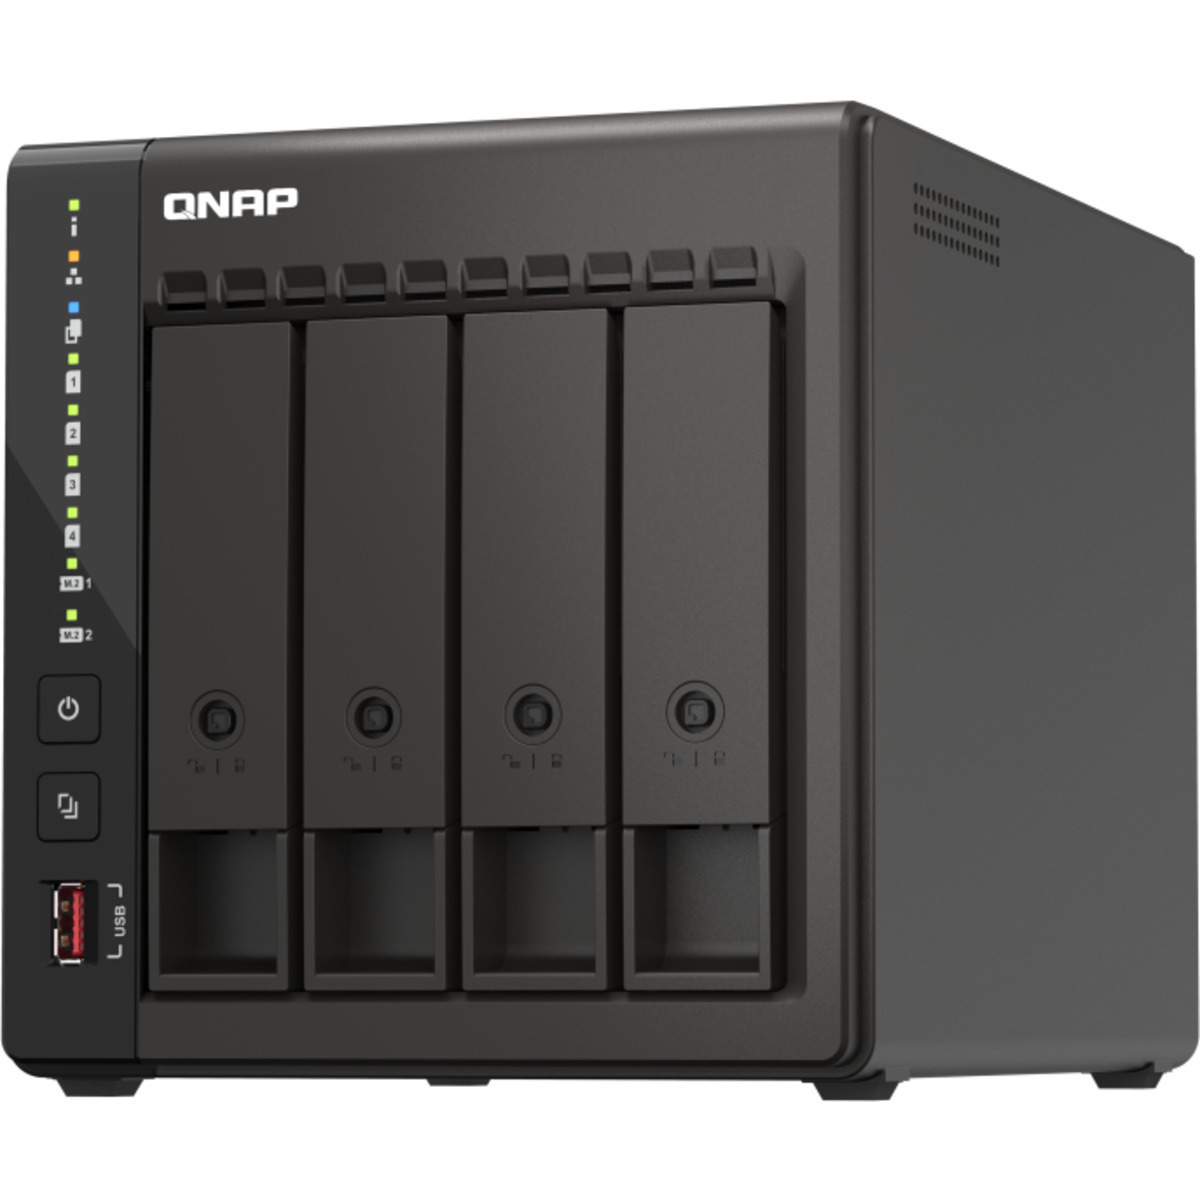 QNAP TS-453E 24tb 4-Bay Desktop Multimedia / Power User / Business NAS - Network Attached Storage Device 4x6tb Seagate BarraCuda ST6000DM003 3.5 5400rpm SATA 6Gb/s HDD CONSUMER Class Drives Installed - Burn-In Tested TS-453E